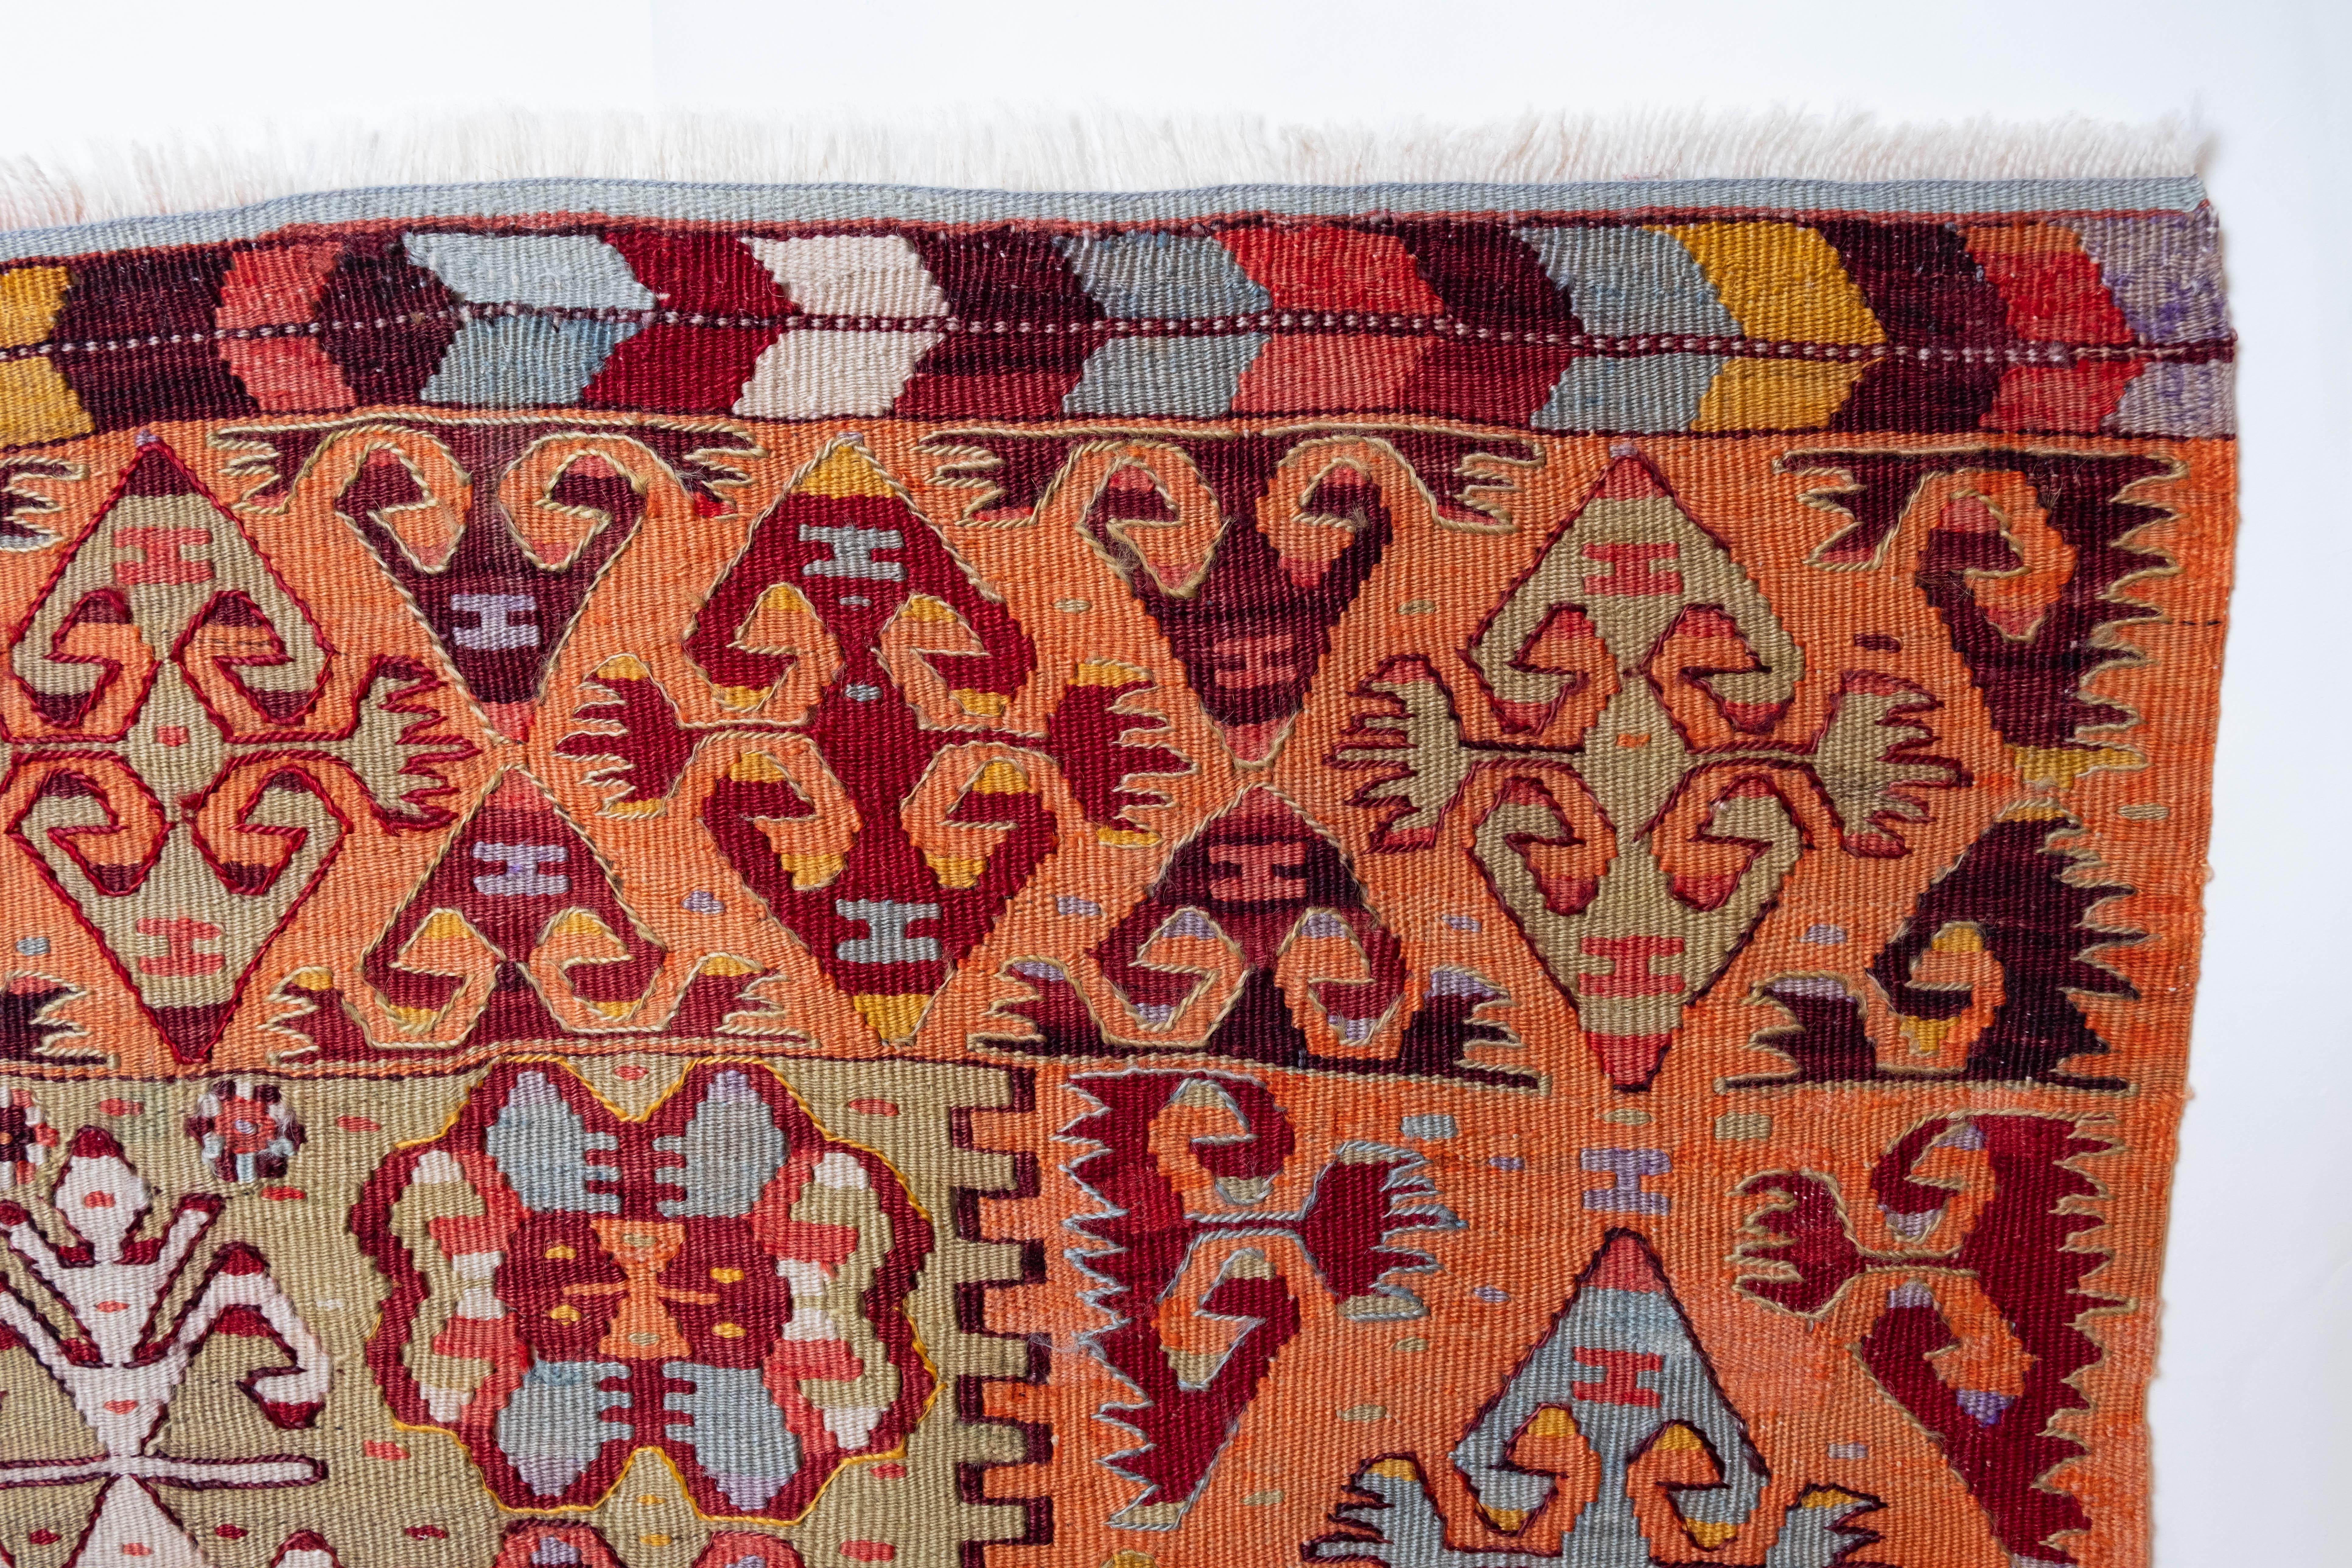 This is Western Anatolian Antique Kilim from the Aydin region with a rare and beautiful color composition.

This highly collectible antique kilim has wonderful special colors and textures that are typical of an old kilim in good condition. It is a